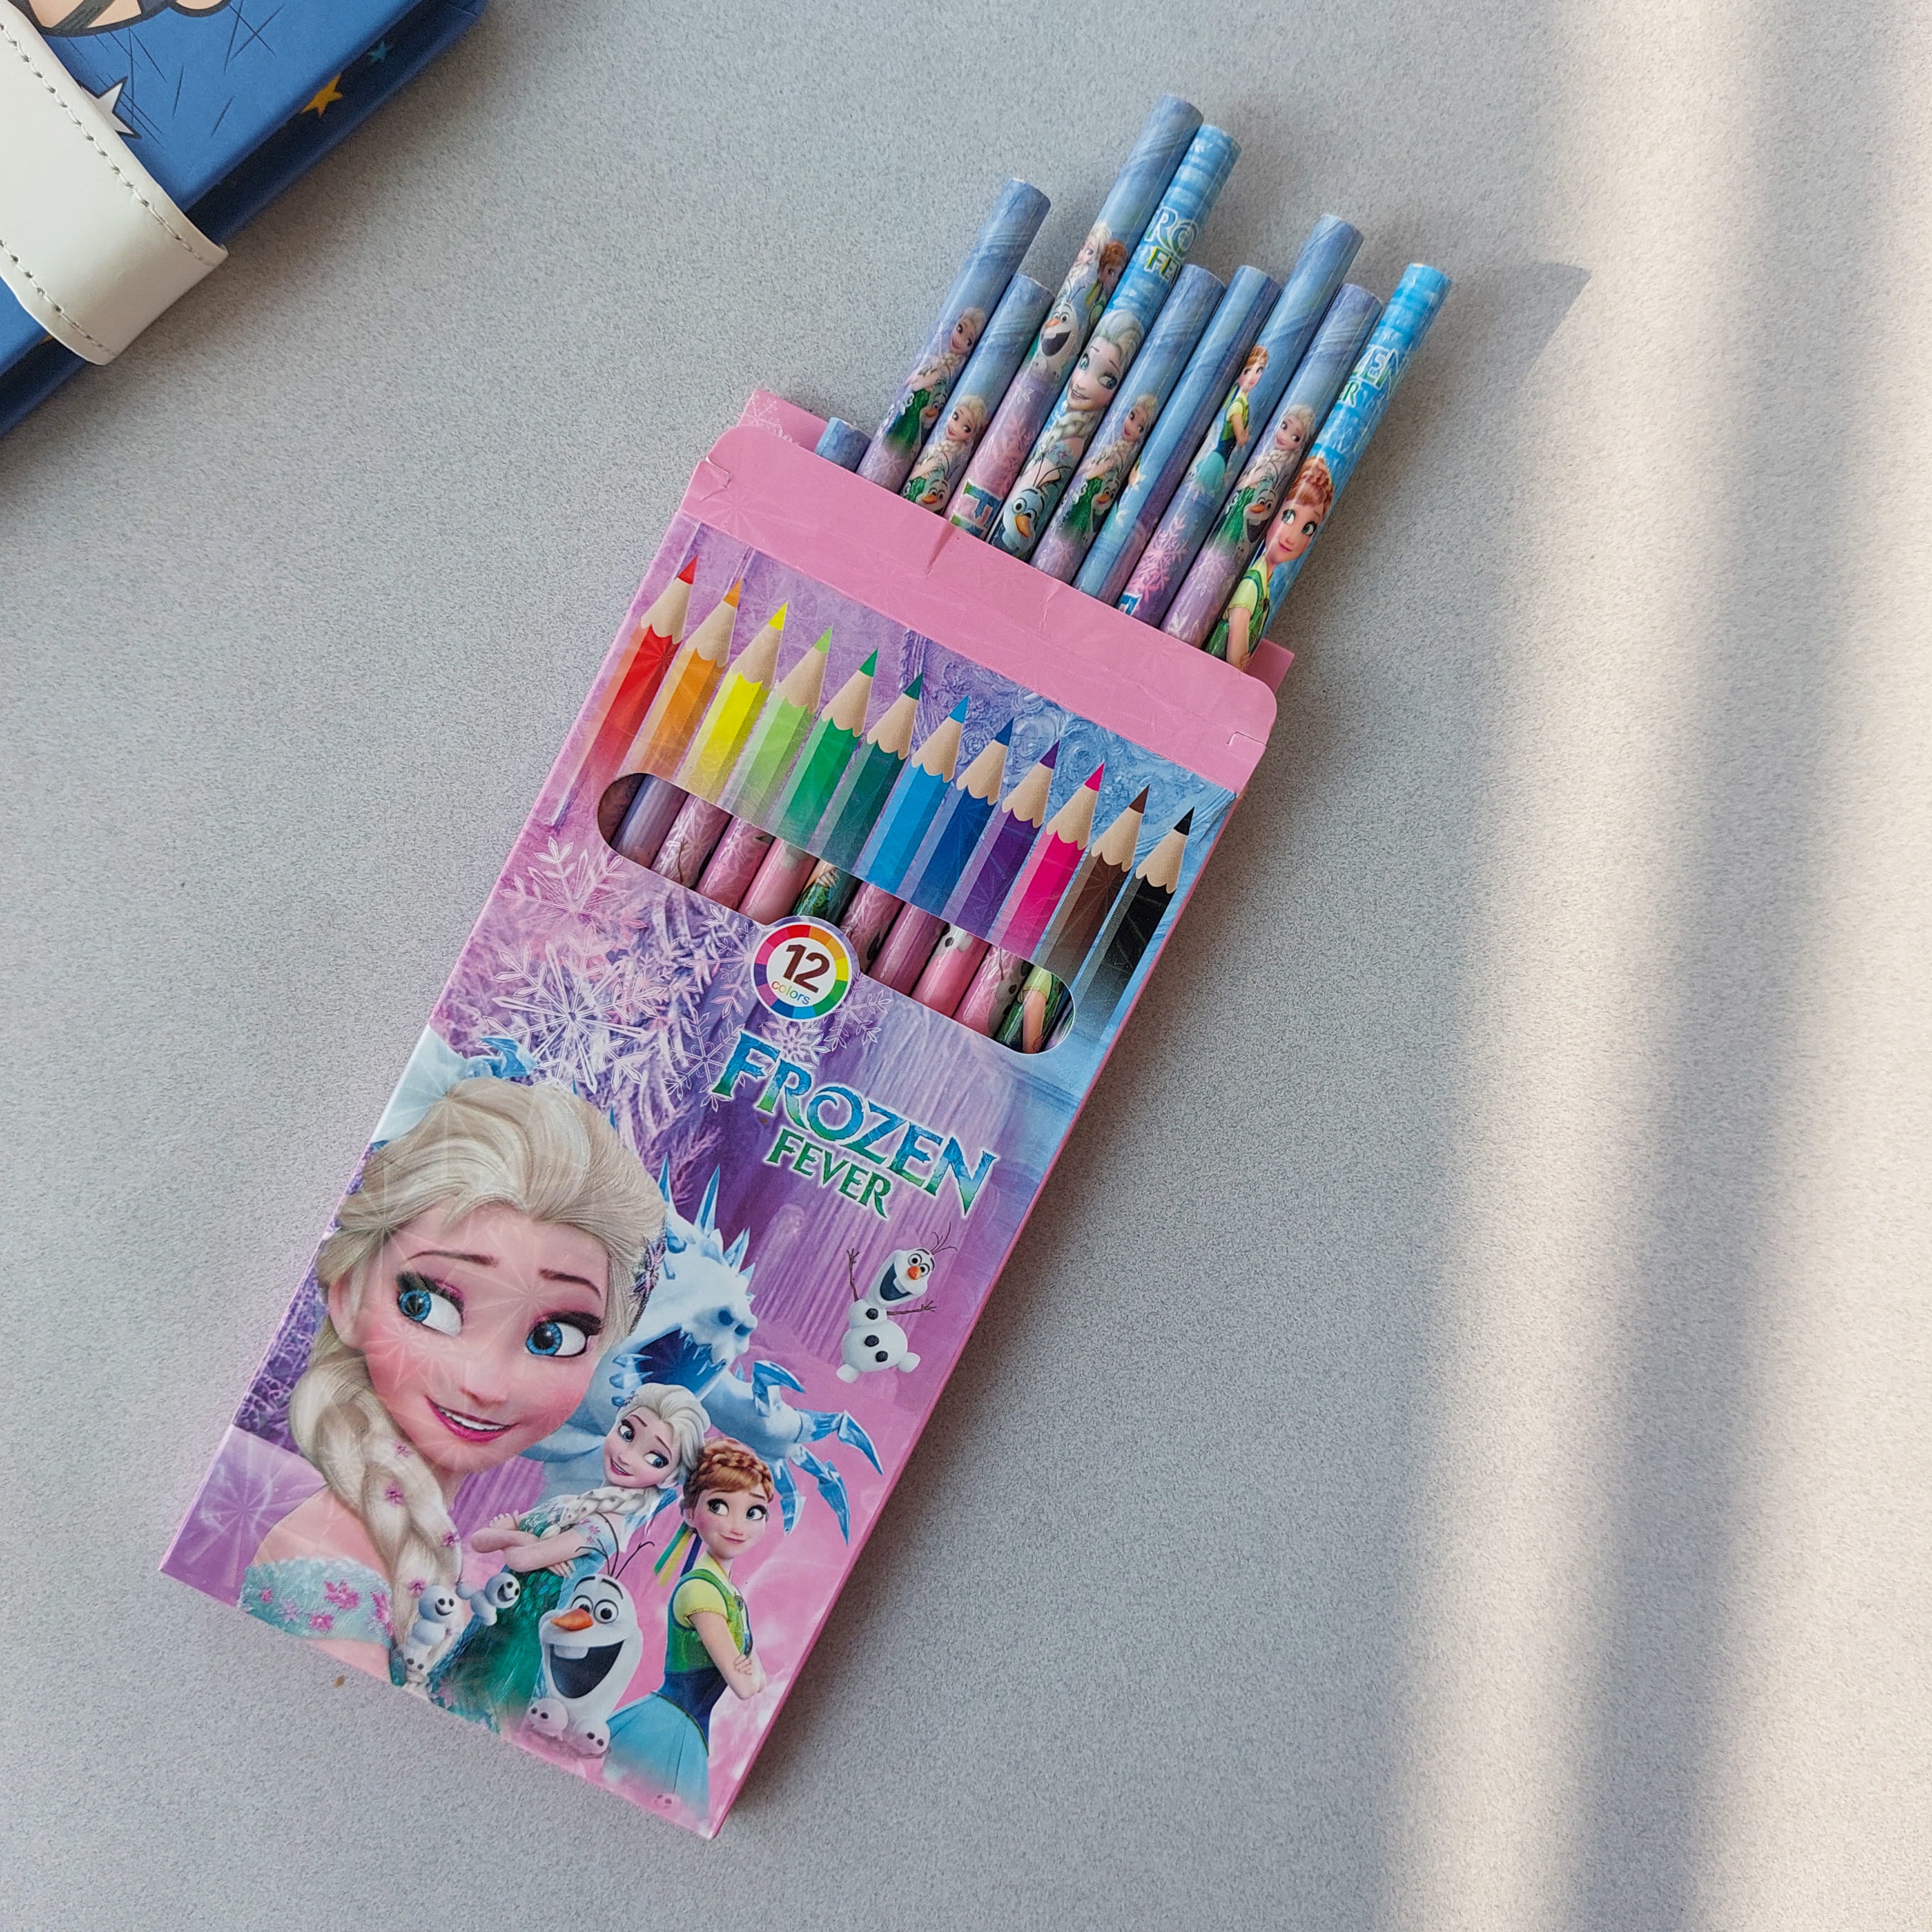 Cars and Frozen Themed Pencils 12pc Set